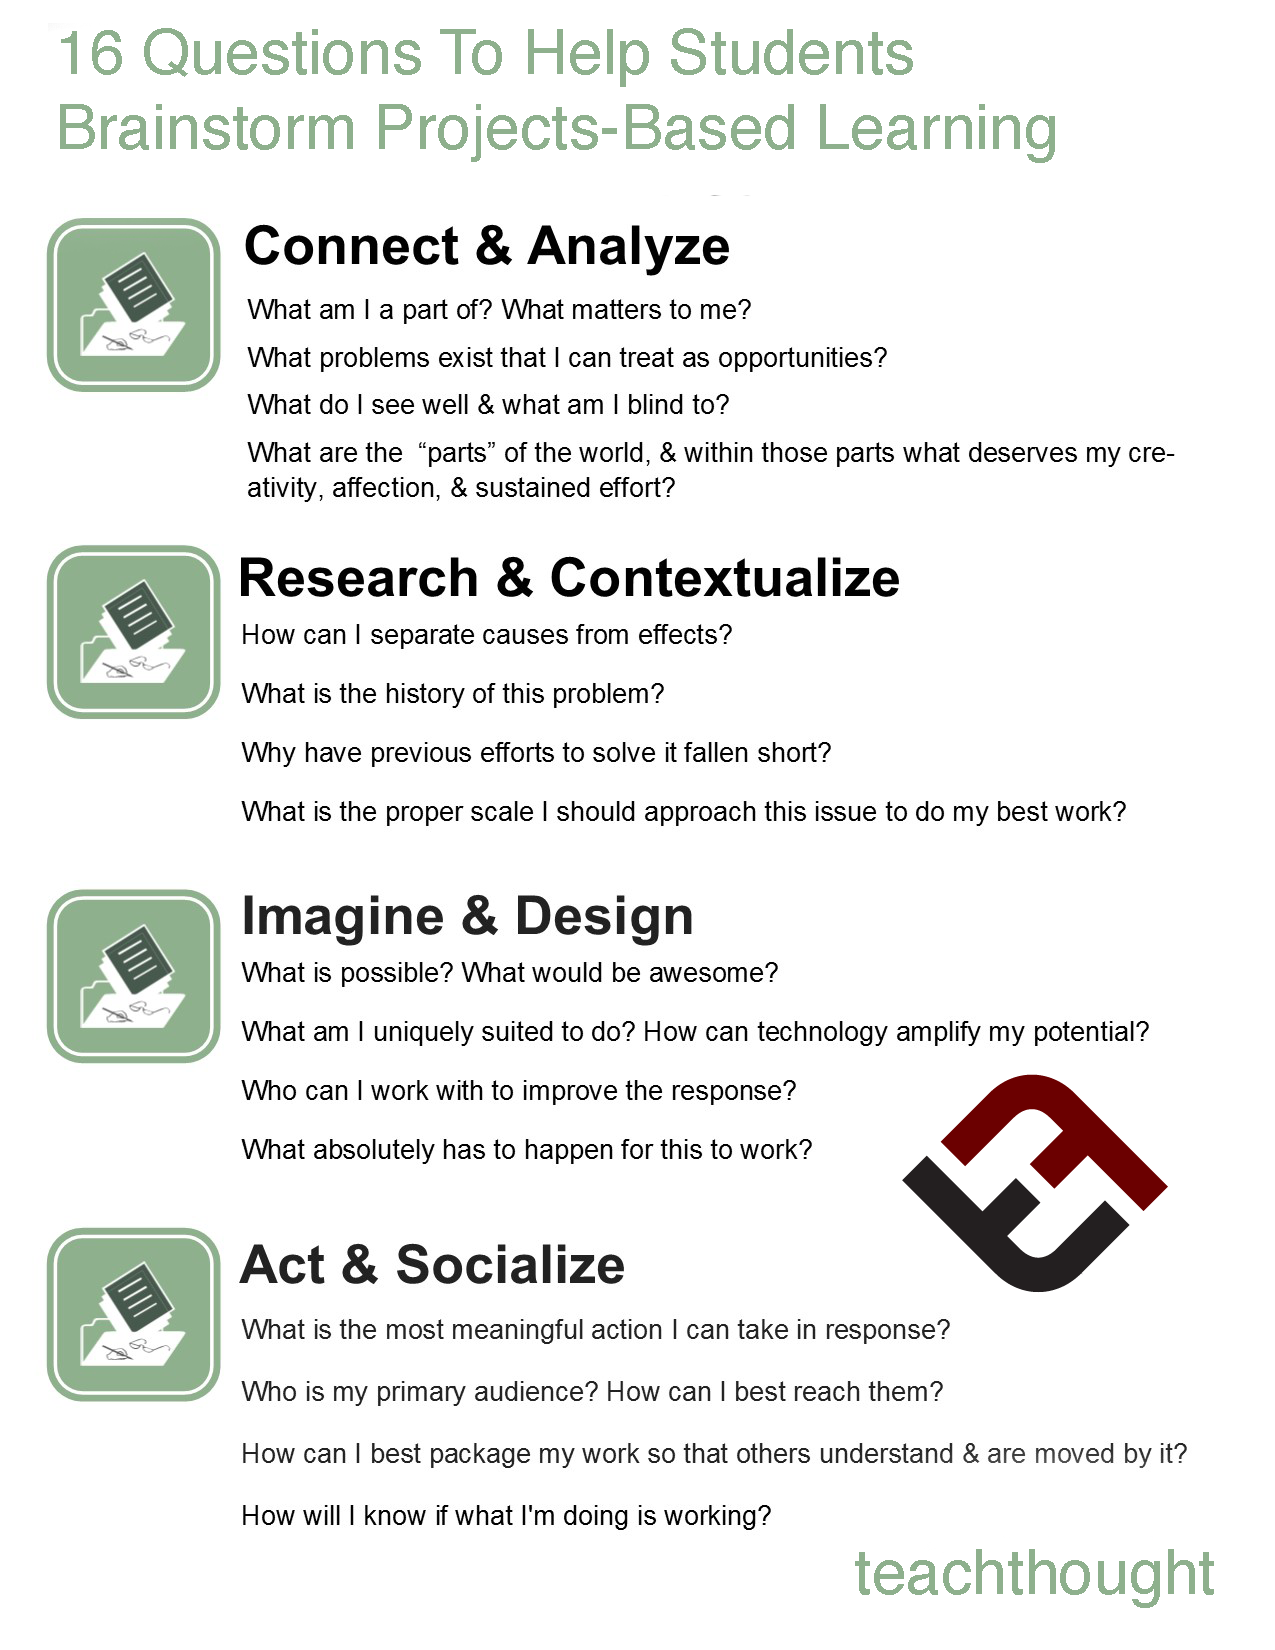 Help Students Brainstorm Project-Based Learning With These 16 Questions